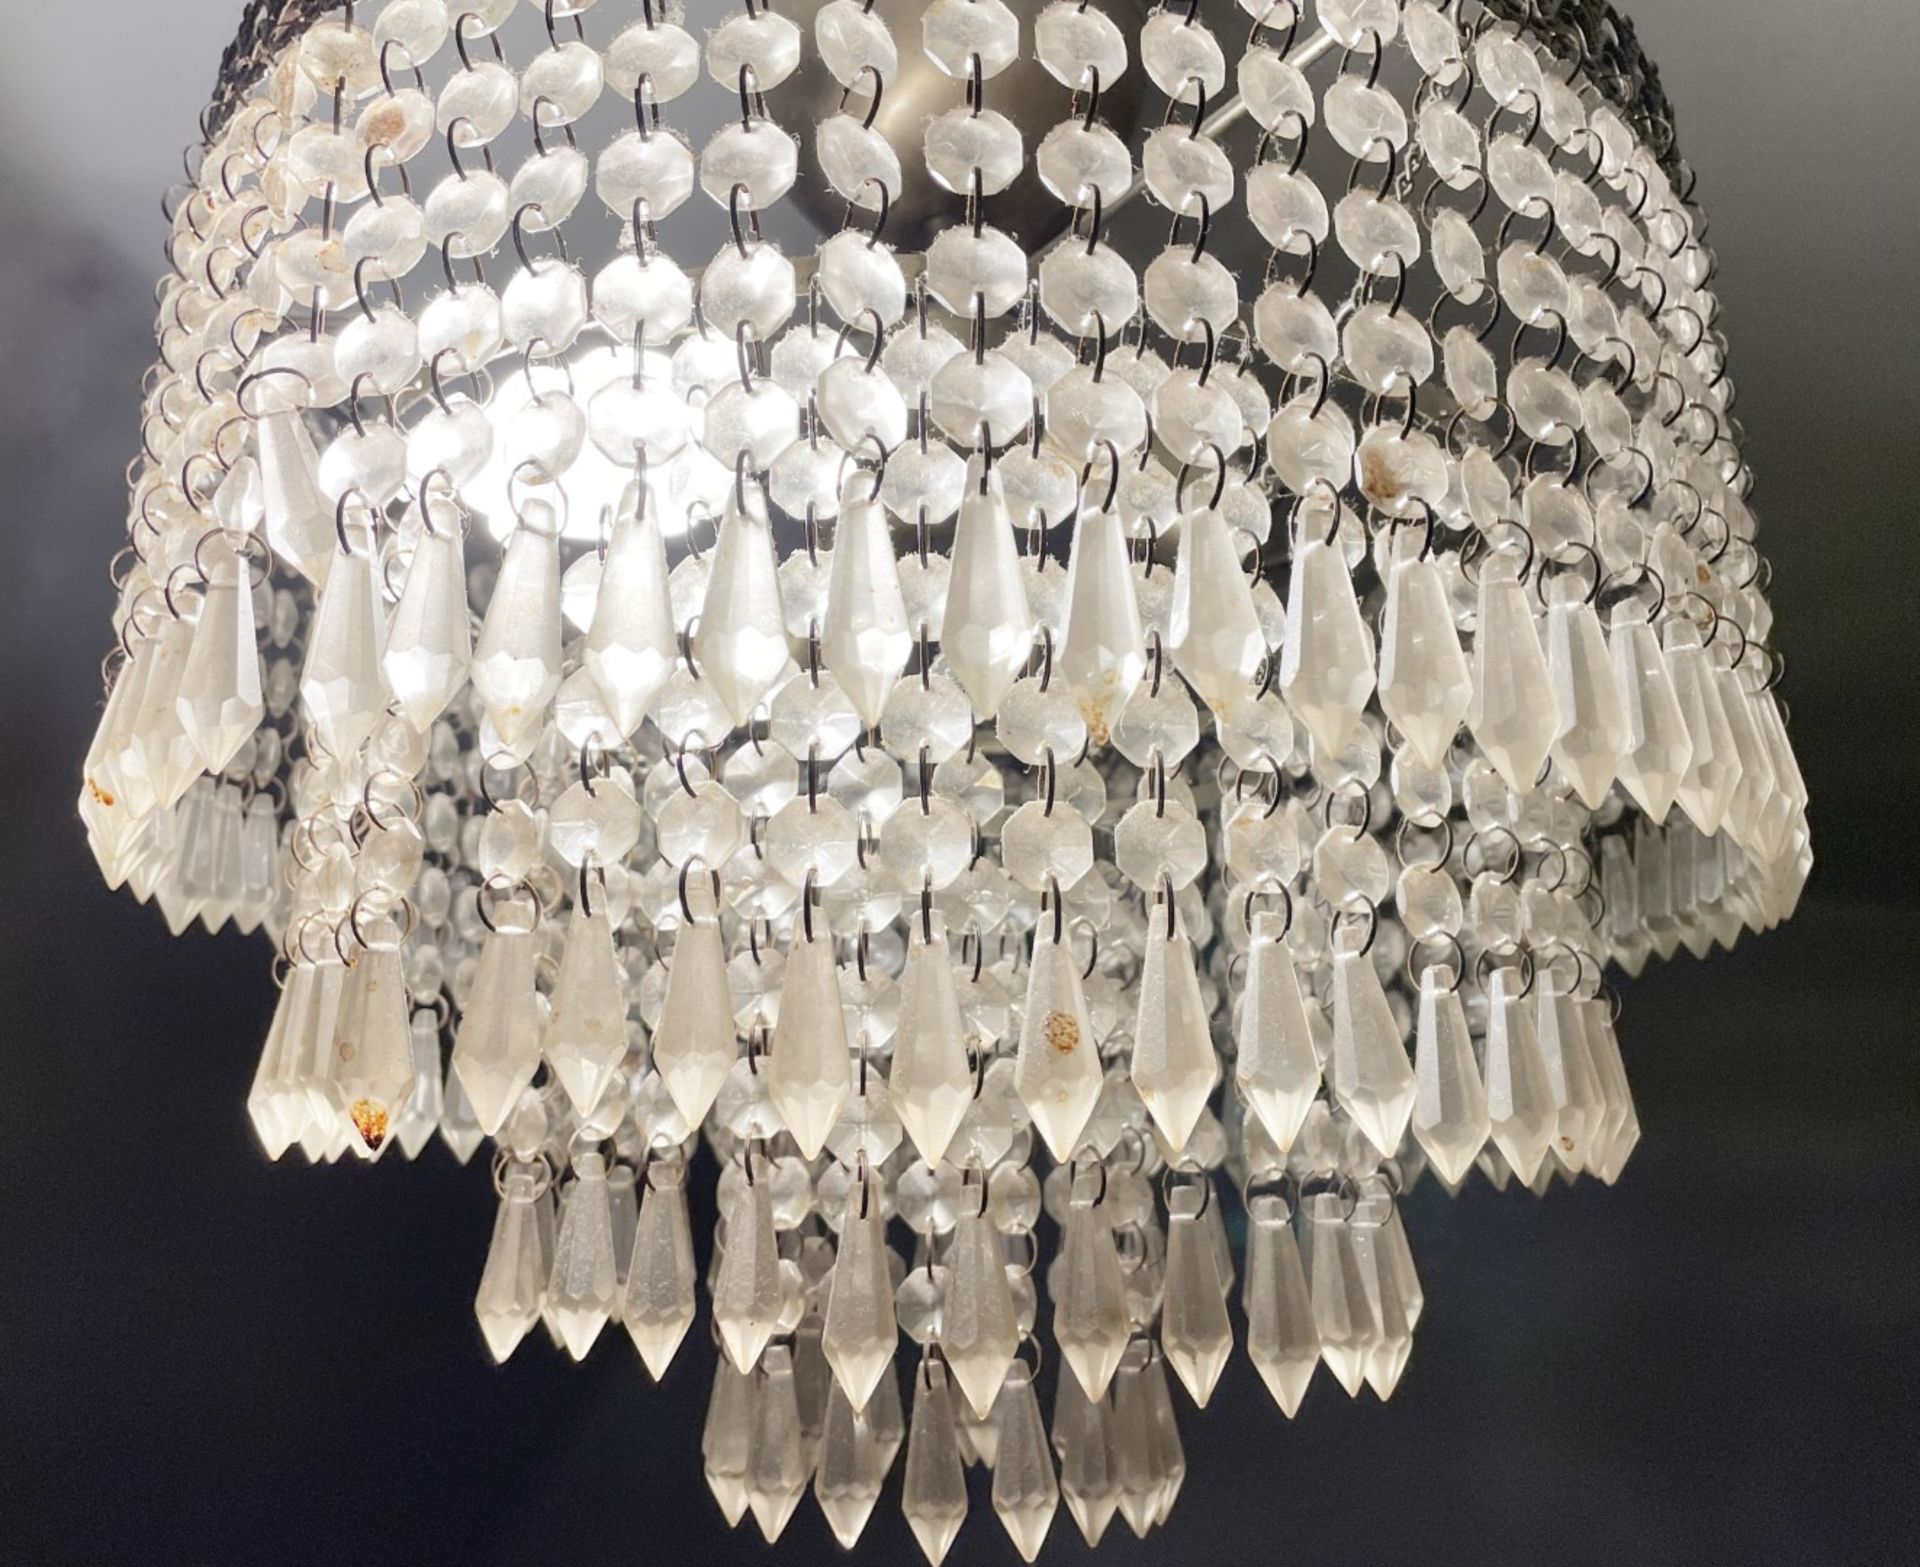 1 x Vintage Ceiling Pendant Chandelier Light Fitting Adorned with 4-Tiers of Glass - Image 3 of 5